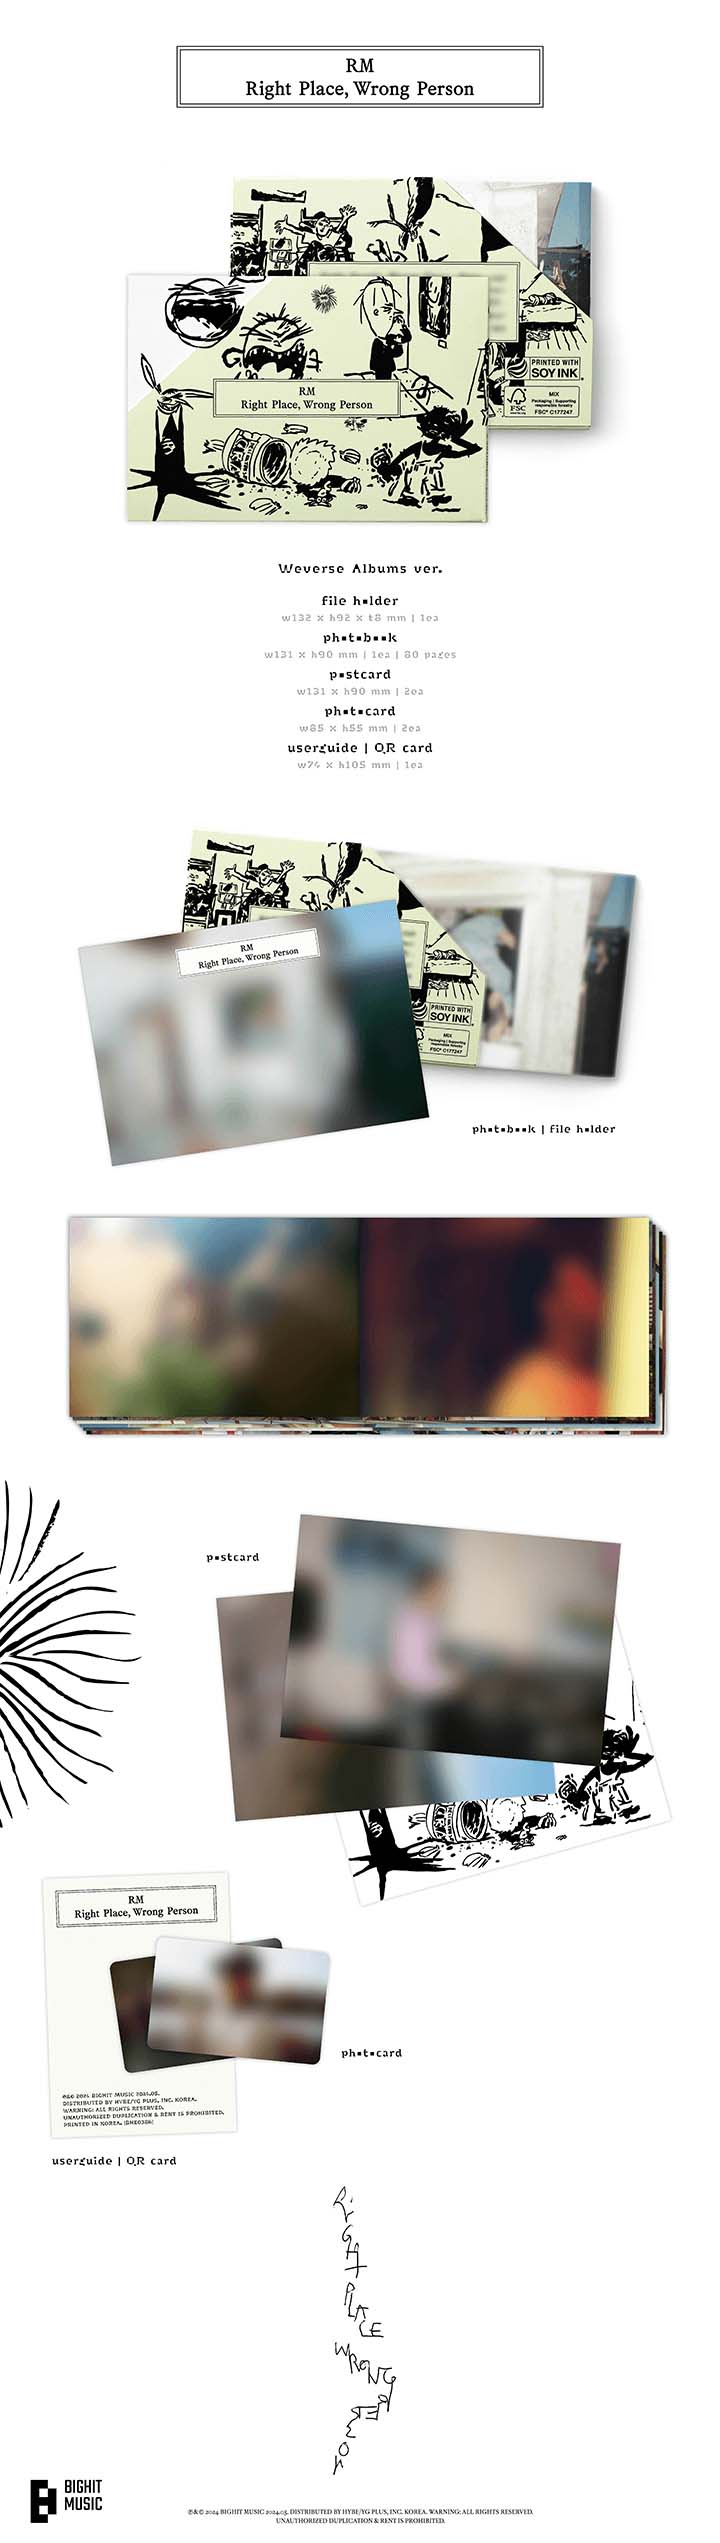 [PRE-ORDER ONLY] RM (BTS) - [RIGHT PLACE, WRONG PERSON] (WEVERSE ALBUMS VER.)